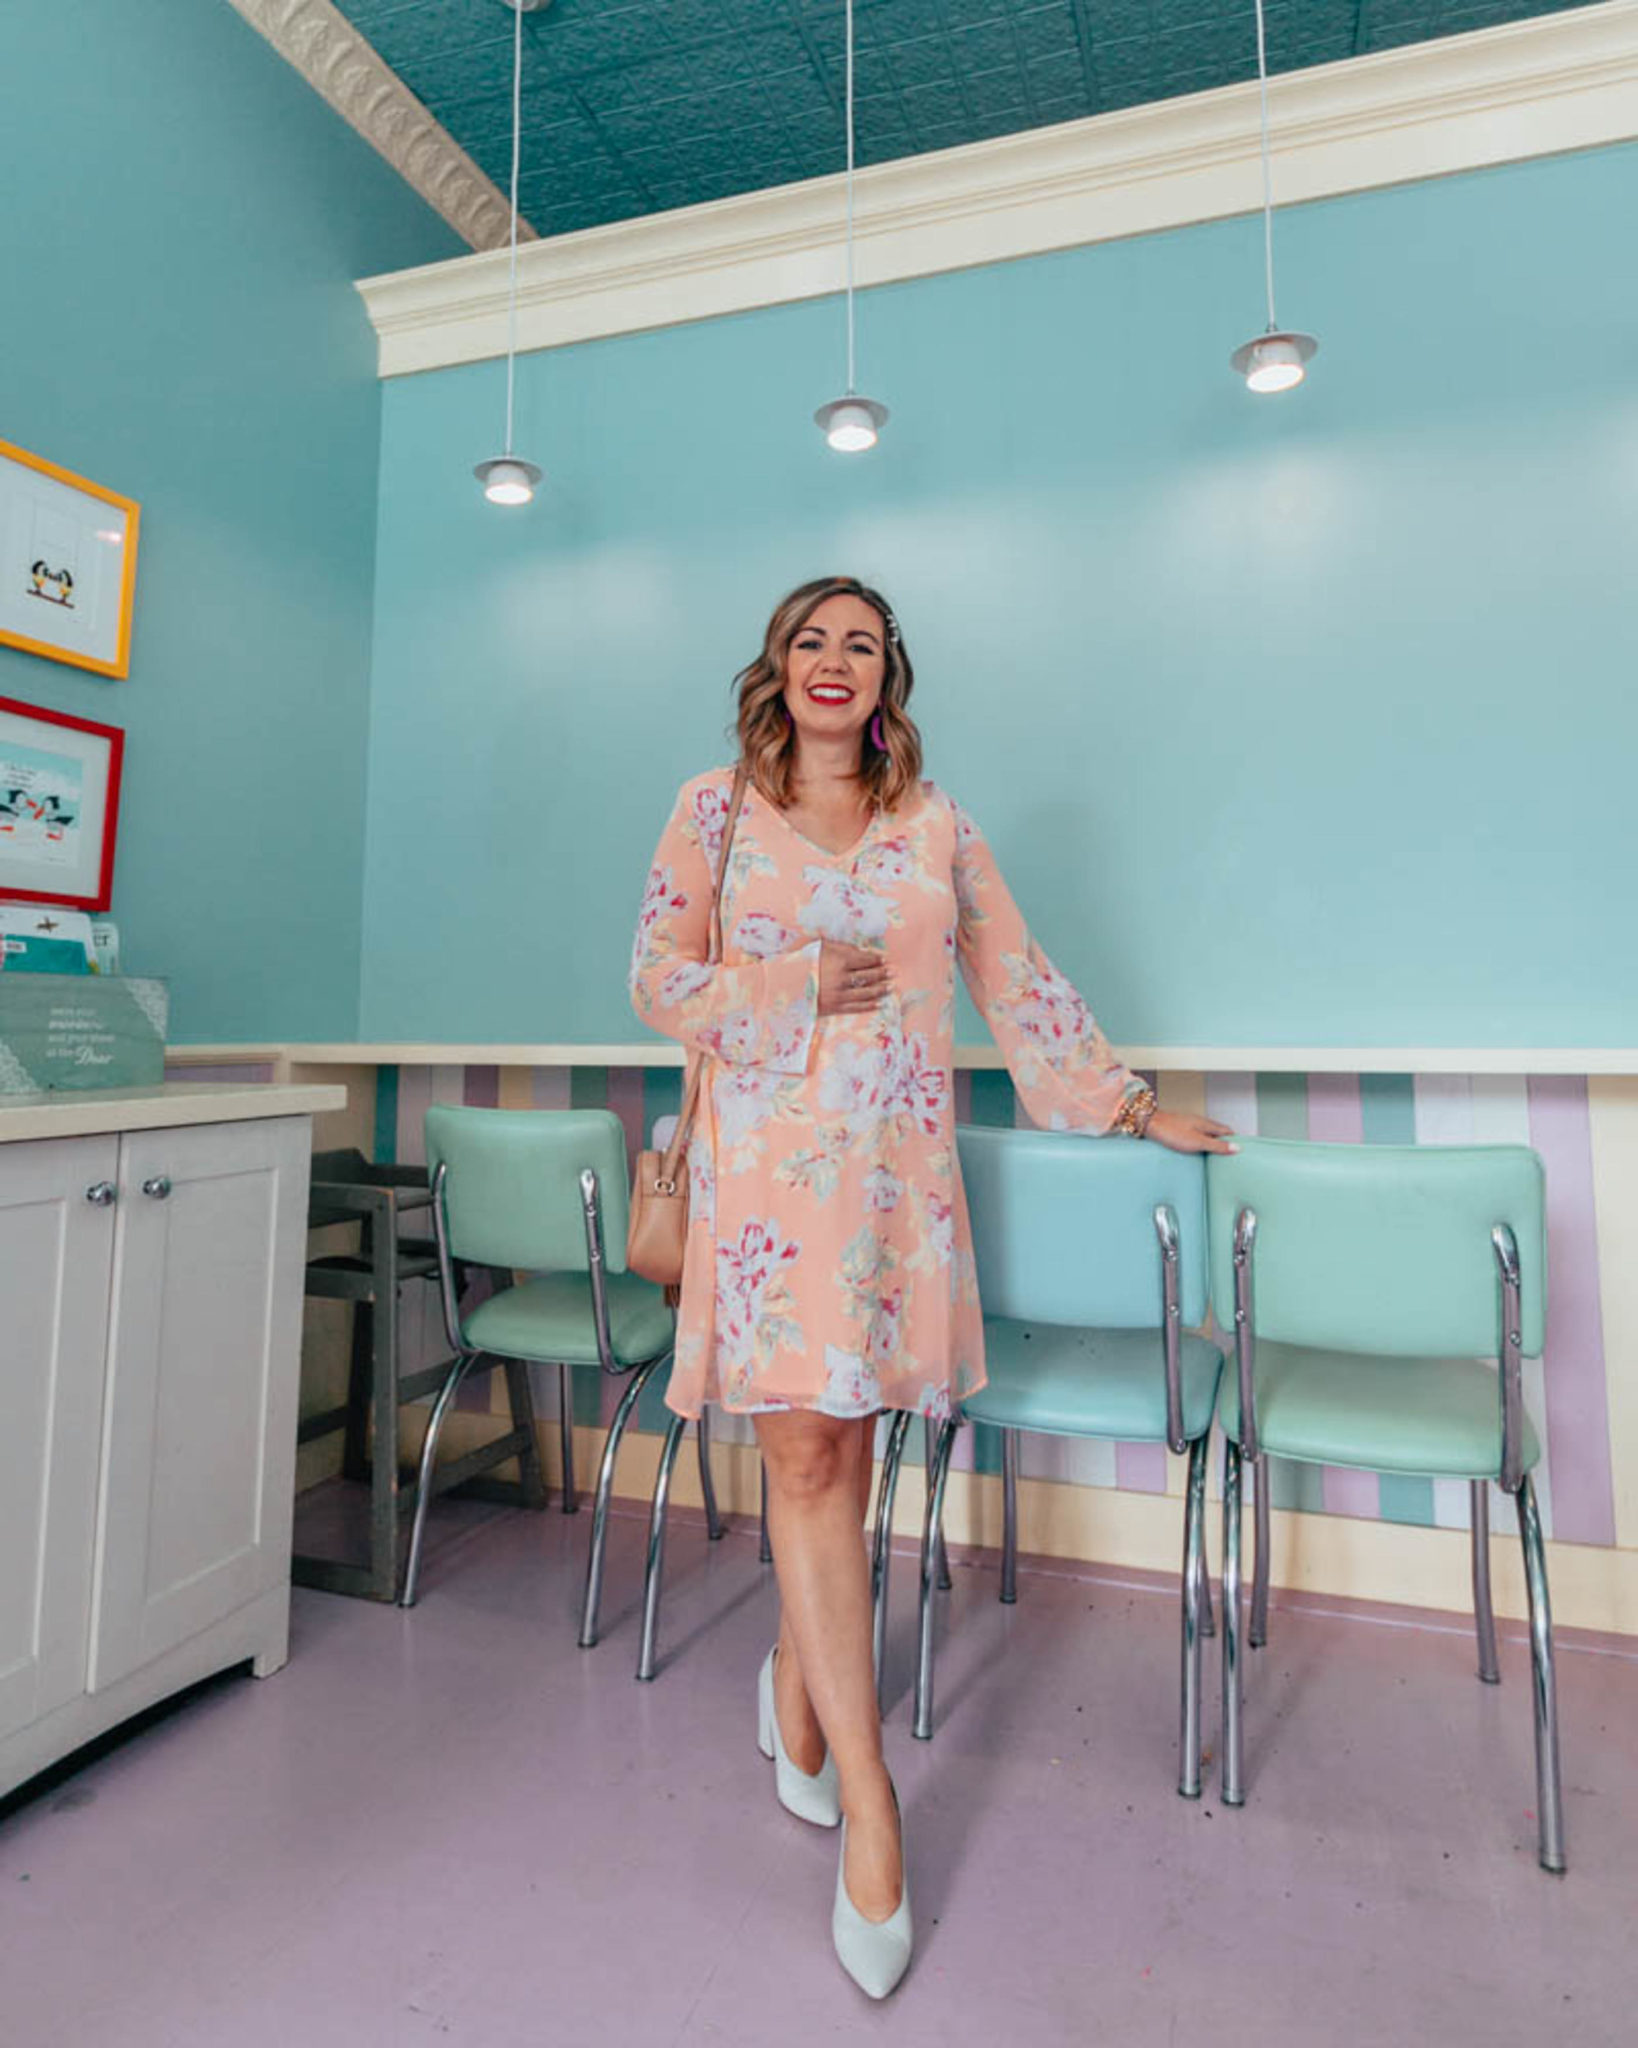 The Best shops to shop for cute maternity clothing featured by top US fashion blog, Glass of Glam: image of a pregnant woman wearing a Pink Blush maternity dress, Naturalizer toe pumps, BaubleBar drop earrings, GUCCI leather bag, and Target pearl bobby pins